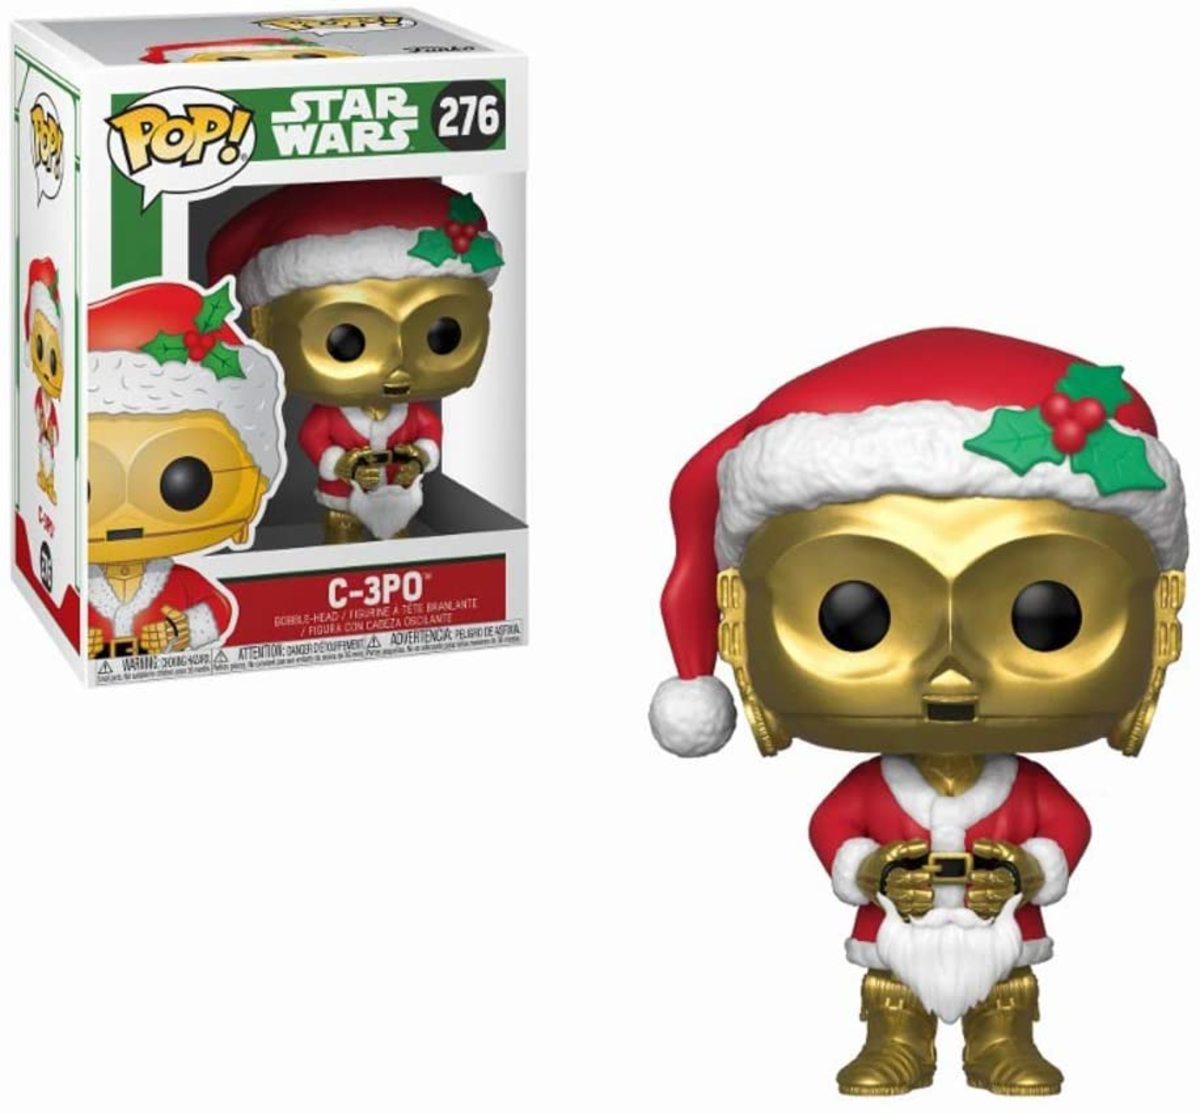 Check out Yoda, Darth Vader, R2D2, and Chewy all decked out for Christmas from Funko Pop!